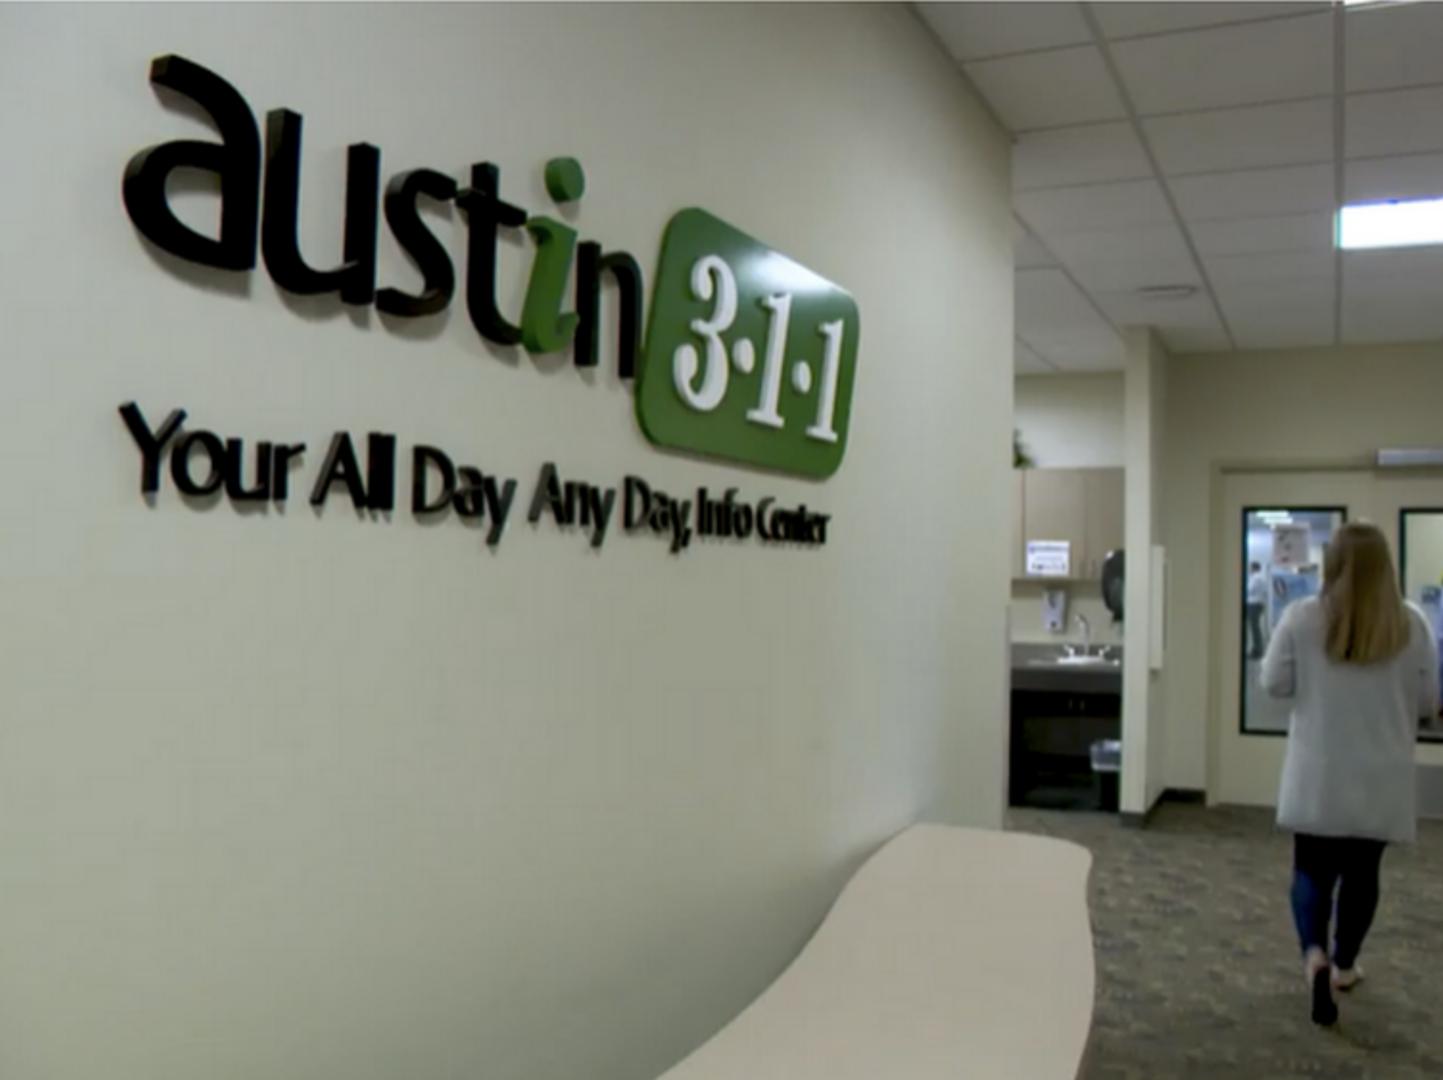 Interior of Austin 3-1-1 building with logo on wall and woman walking